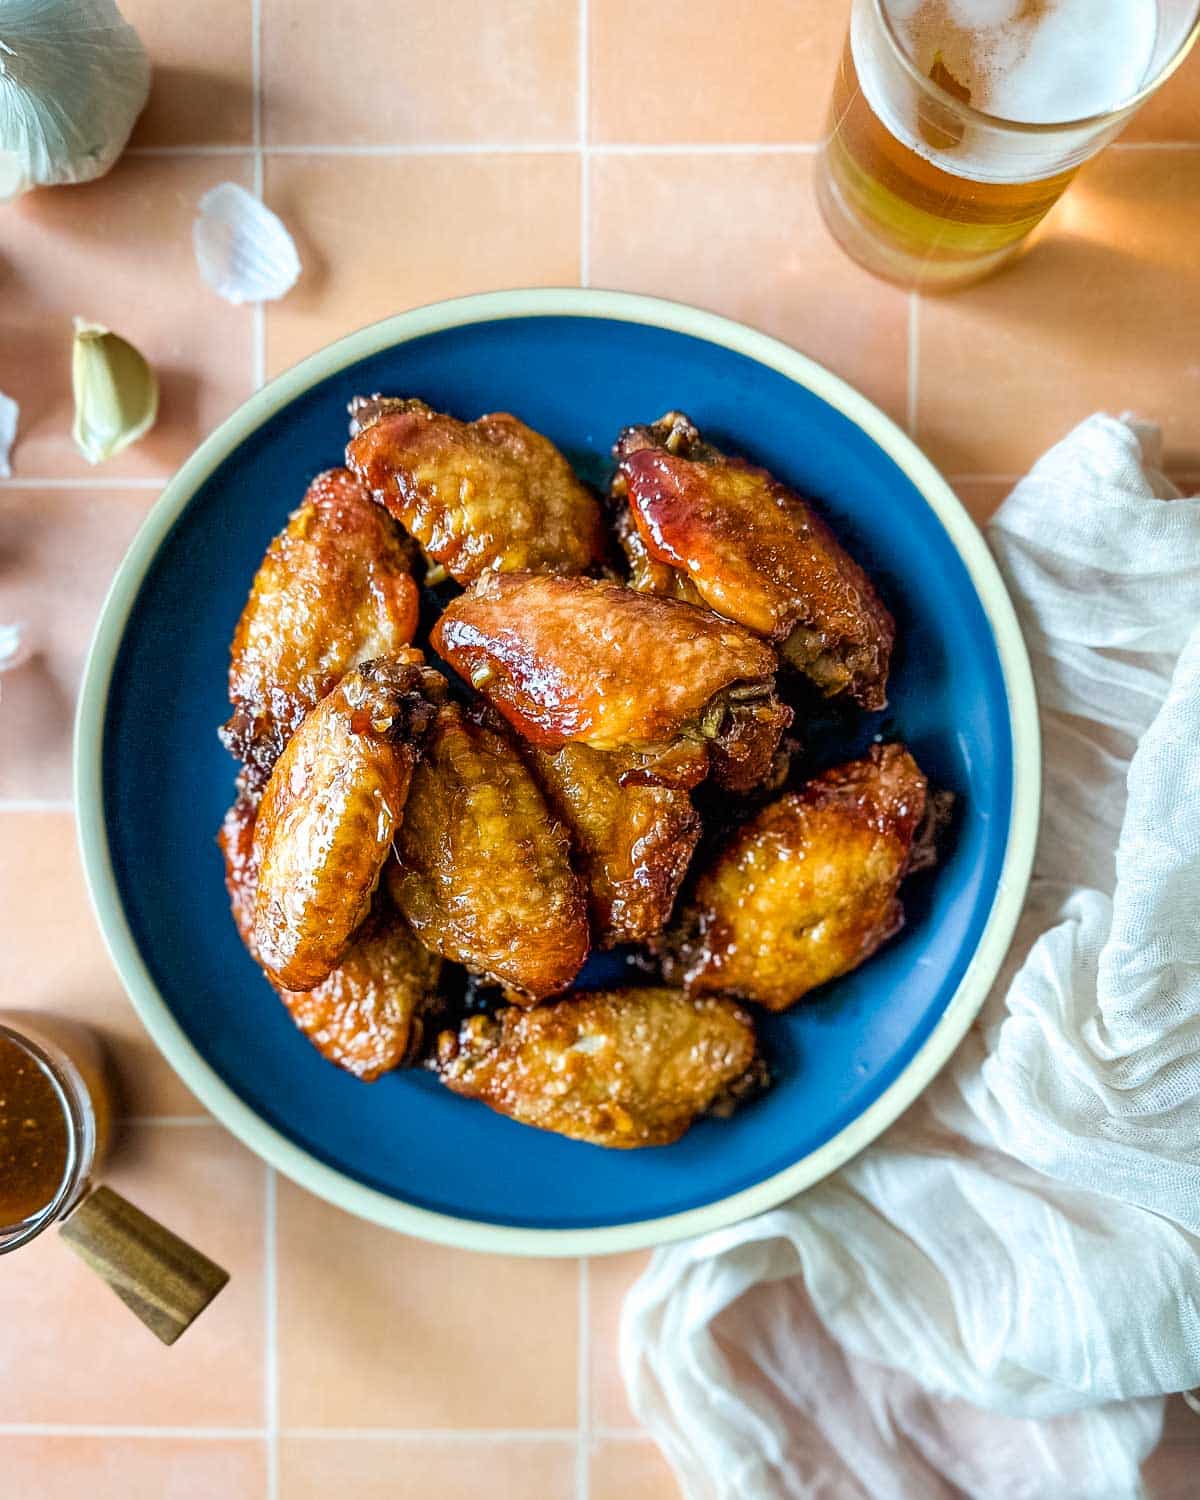 An overhead shot of soy garlic chicken wings on a blue plate surrounded by garlic cloves, a white linen, and a glass of beer.